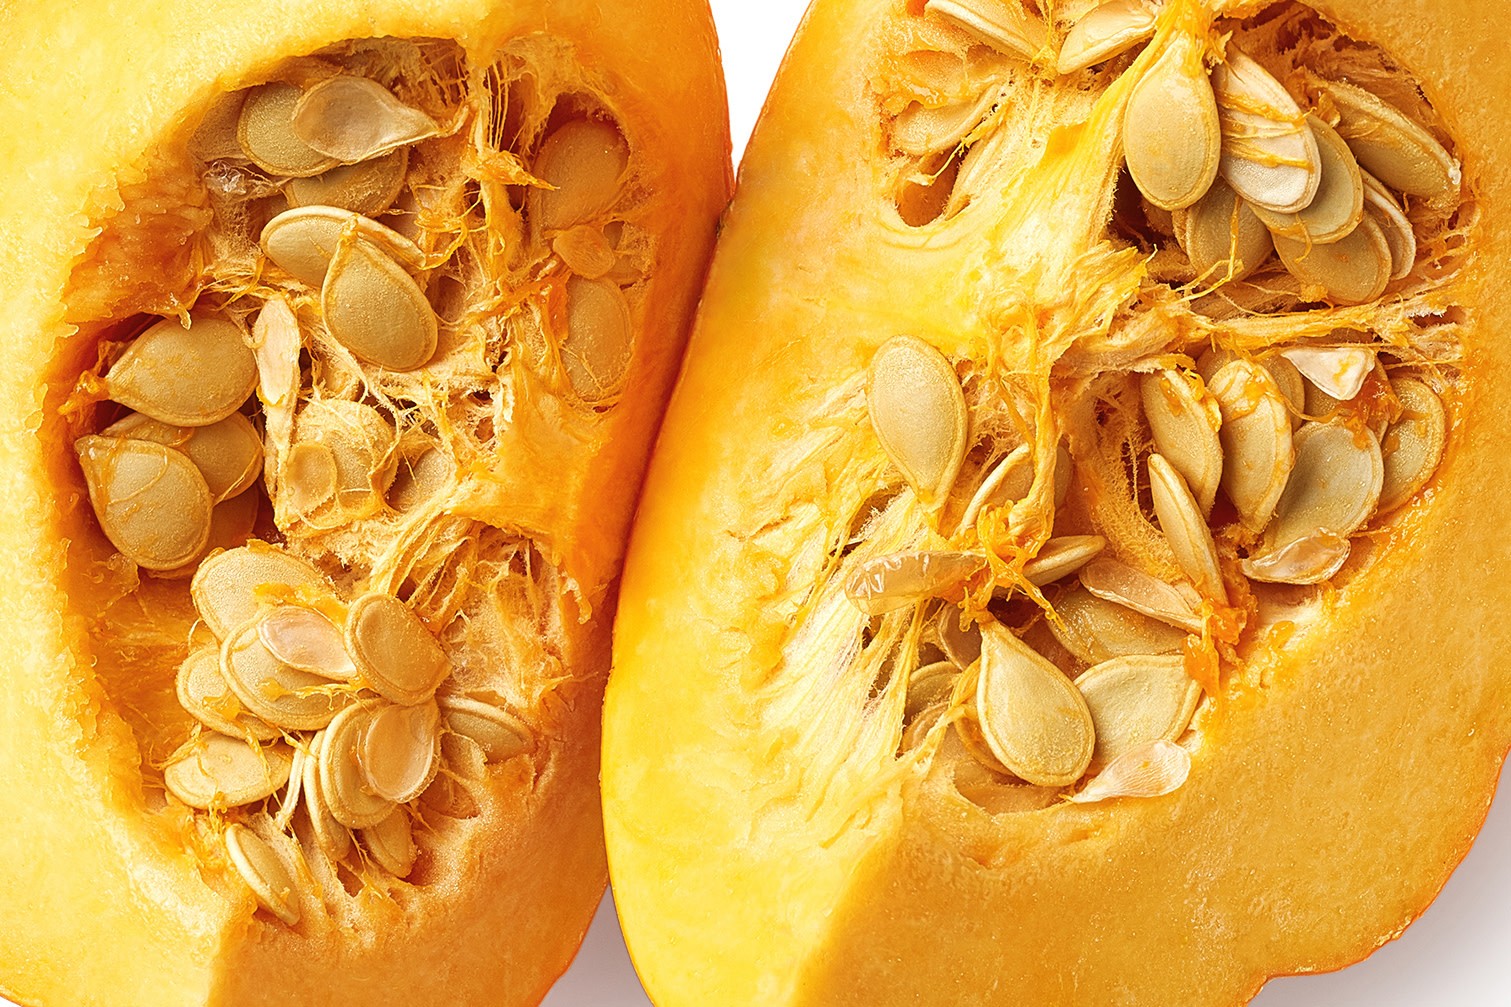 Pumpkin Seeds: Absolutely For Your Prostate Health and 9 Benefits More!